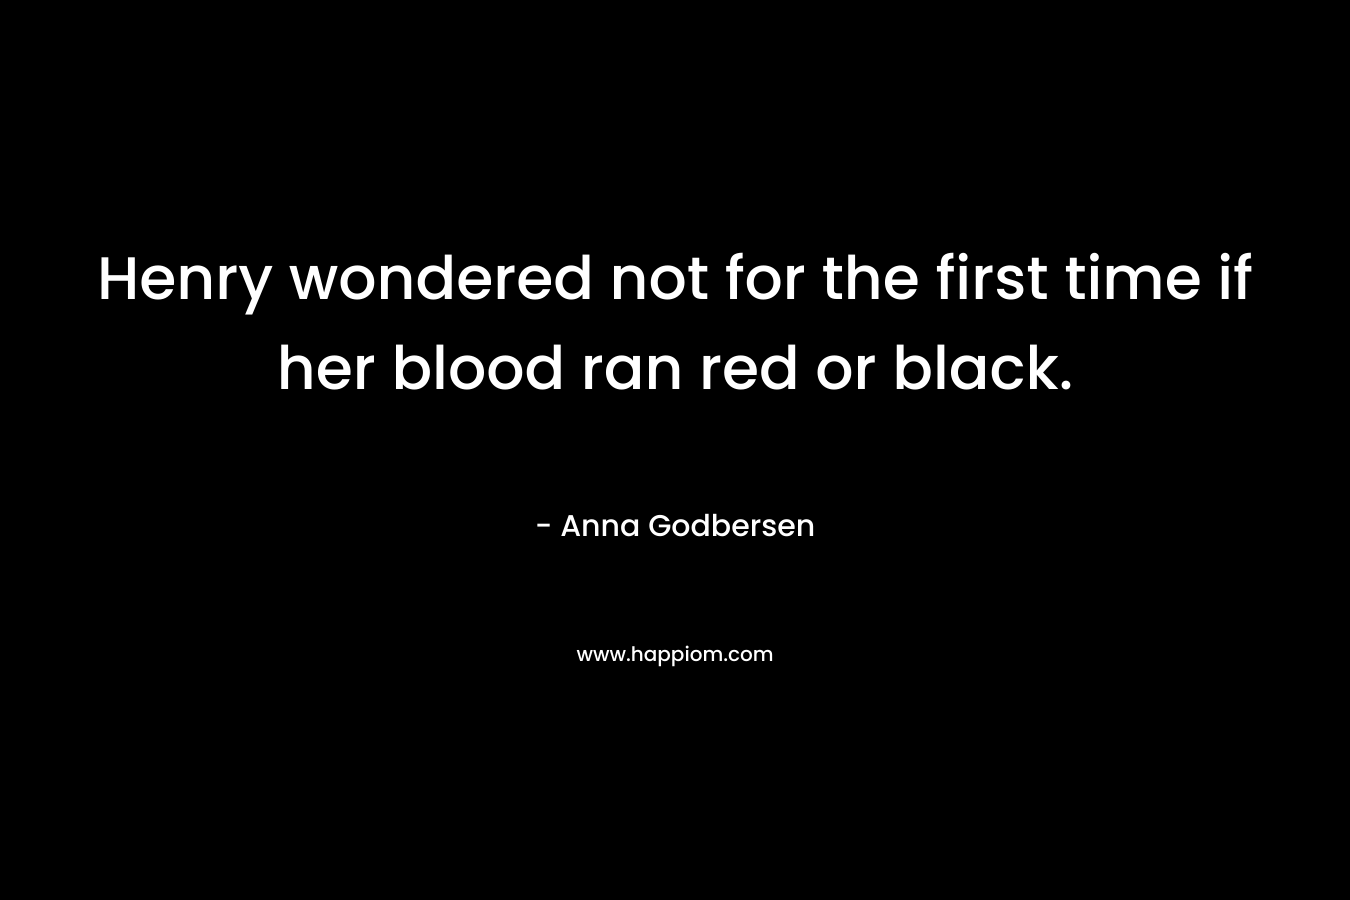 Henry wondered not for the first time if her blood ran red or black. – Anna Godbersen